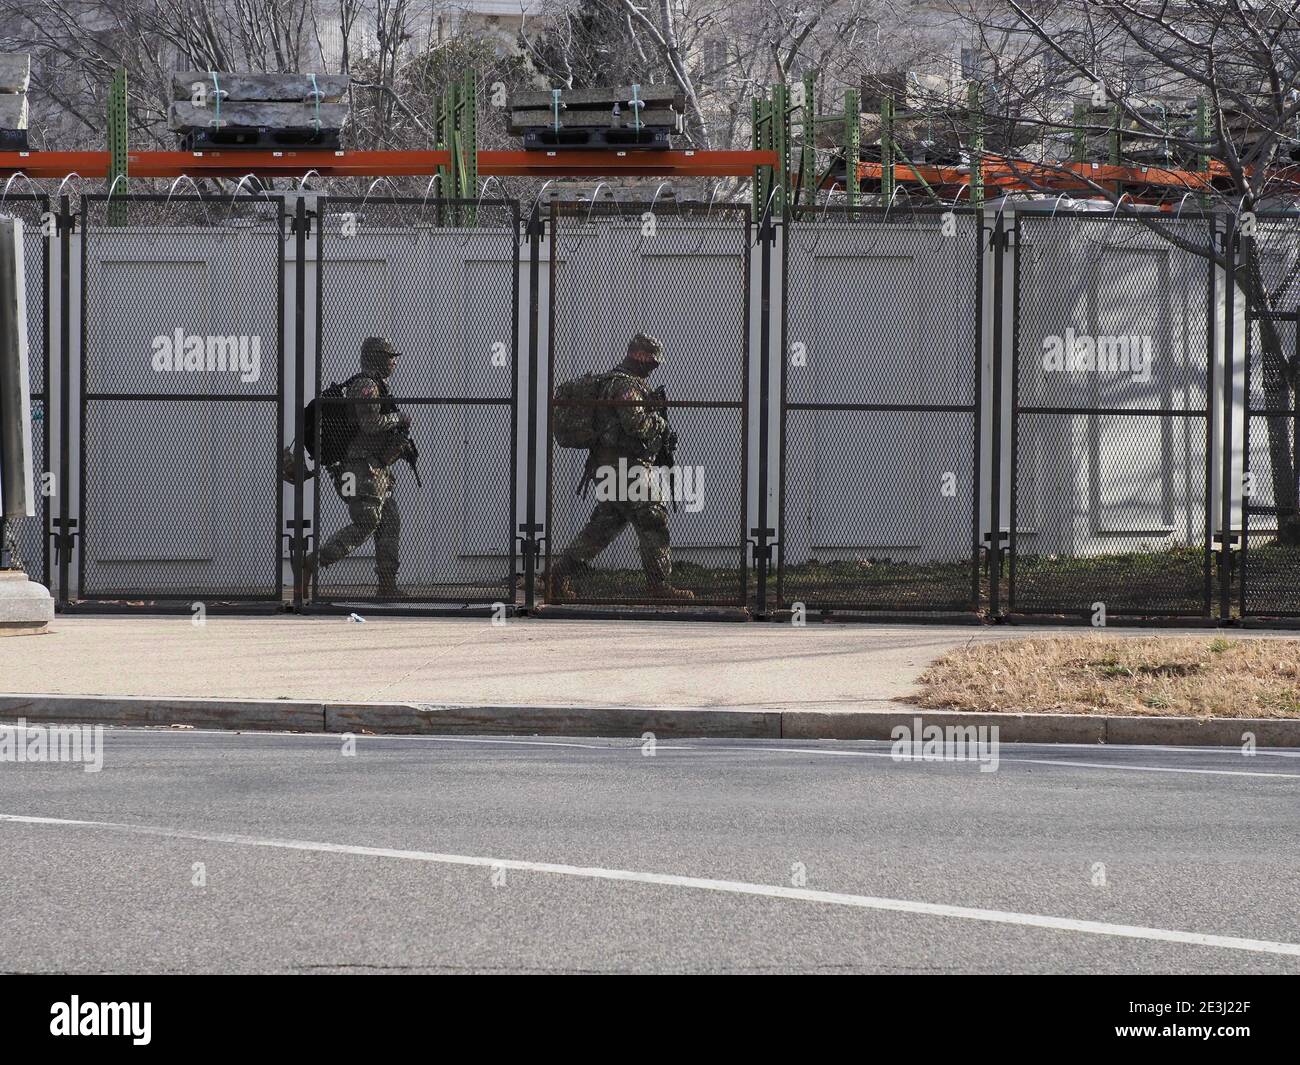 Washington, District of Columbia, USA. 18th Jan, 2021. These National Guard troops patrol the fenced off area around the U.S. Capitol during the lead up to the inauguration. Credit: Sue Dorfman/ZUMA Wire/Alamy Live News Stock Photo